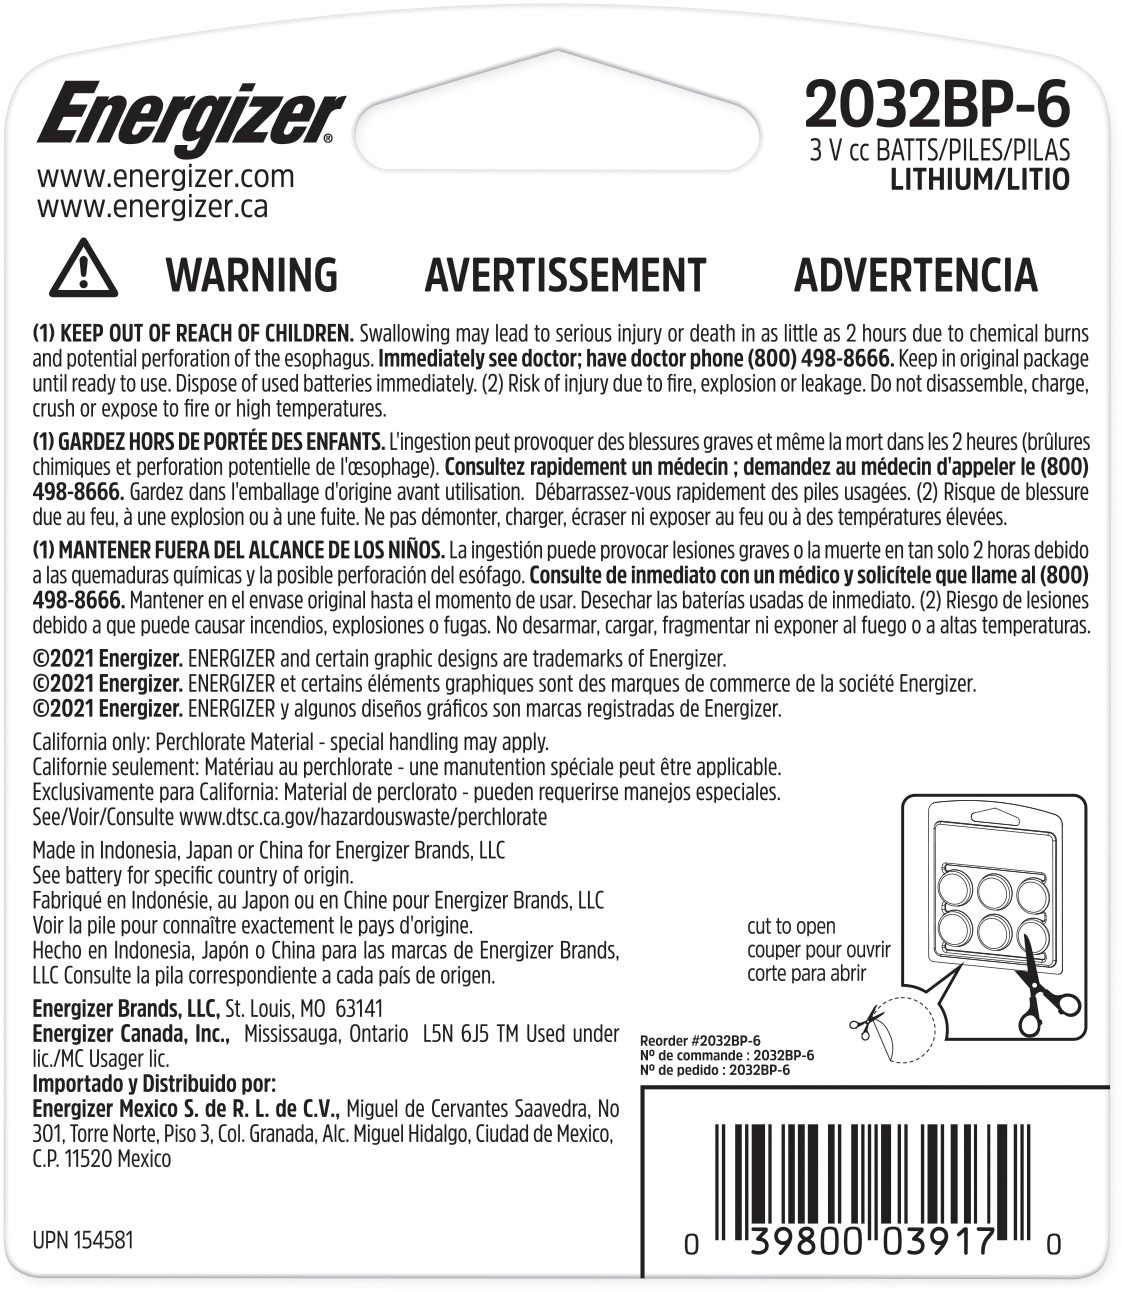 Energizer 2032 3V Lithium Watch Battery - ECR2032BP - Made in Japan (F